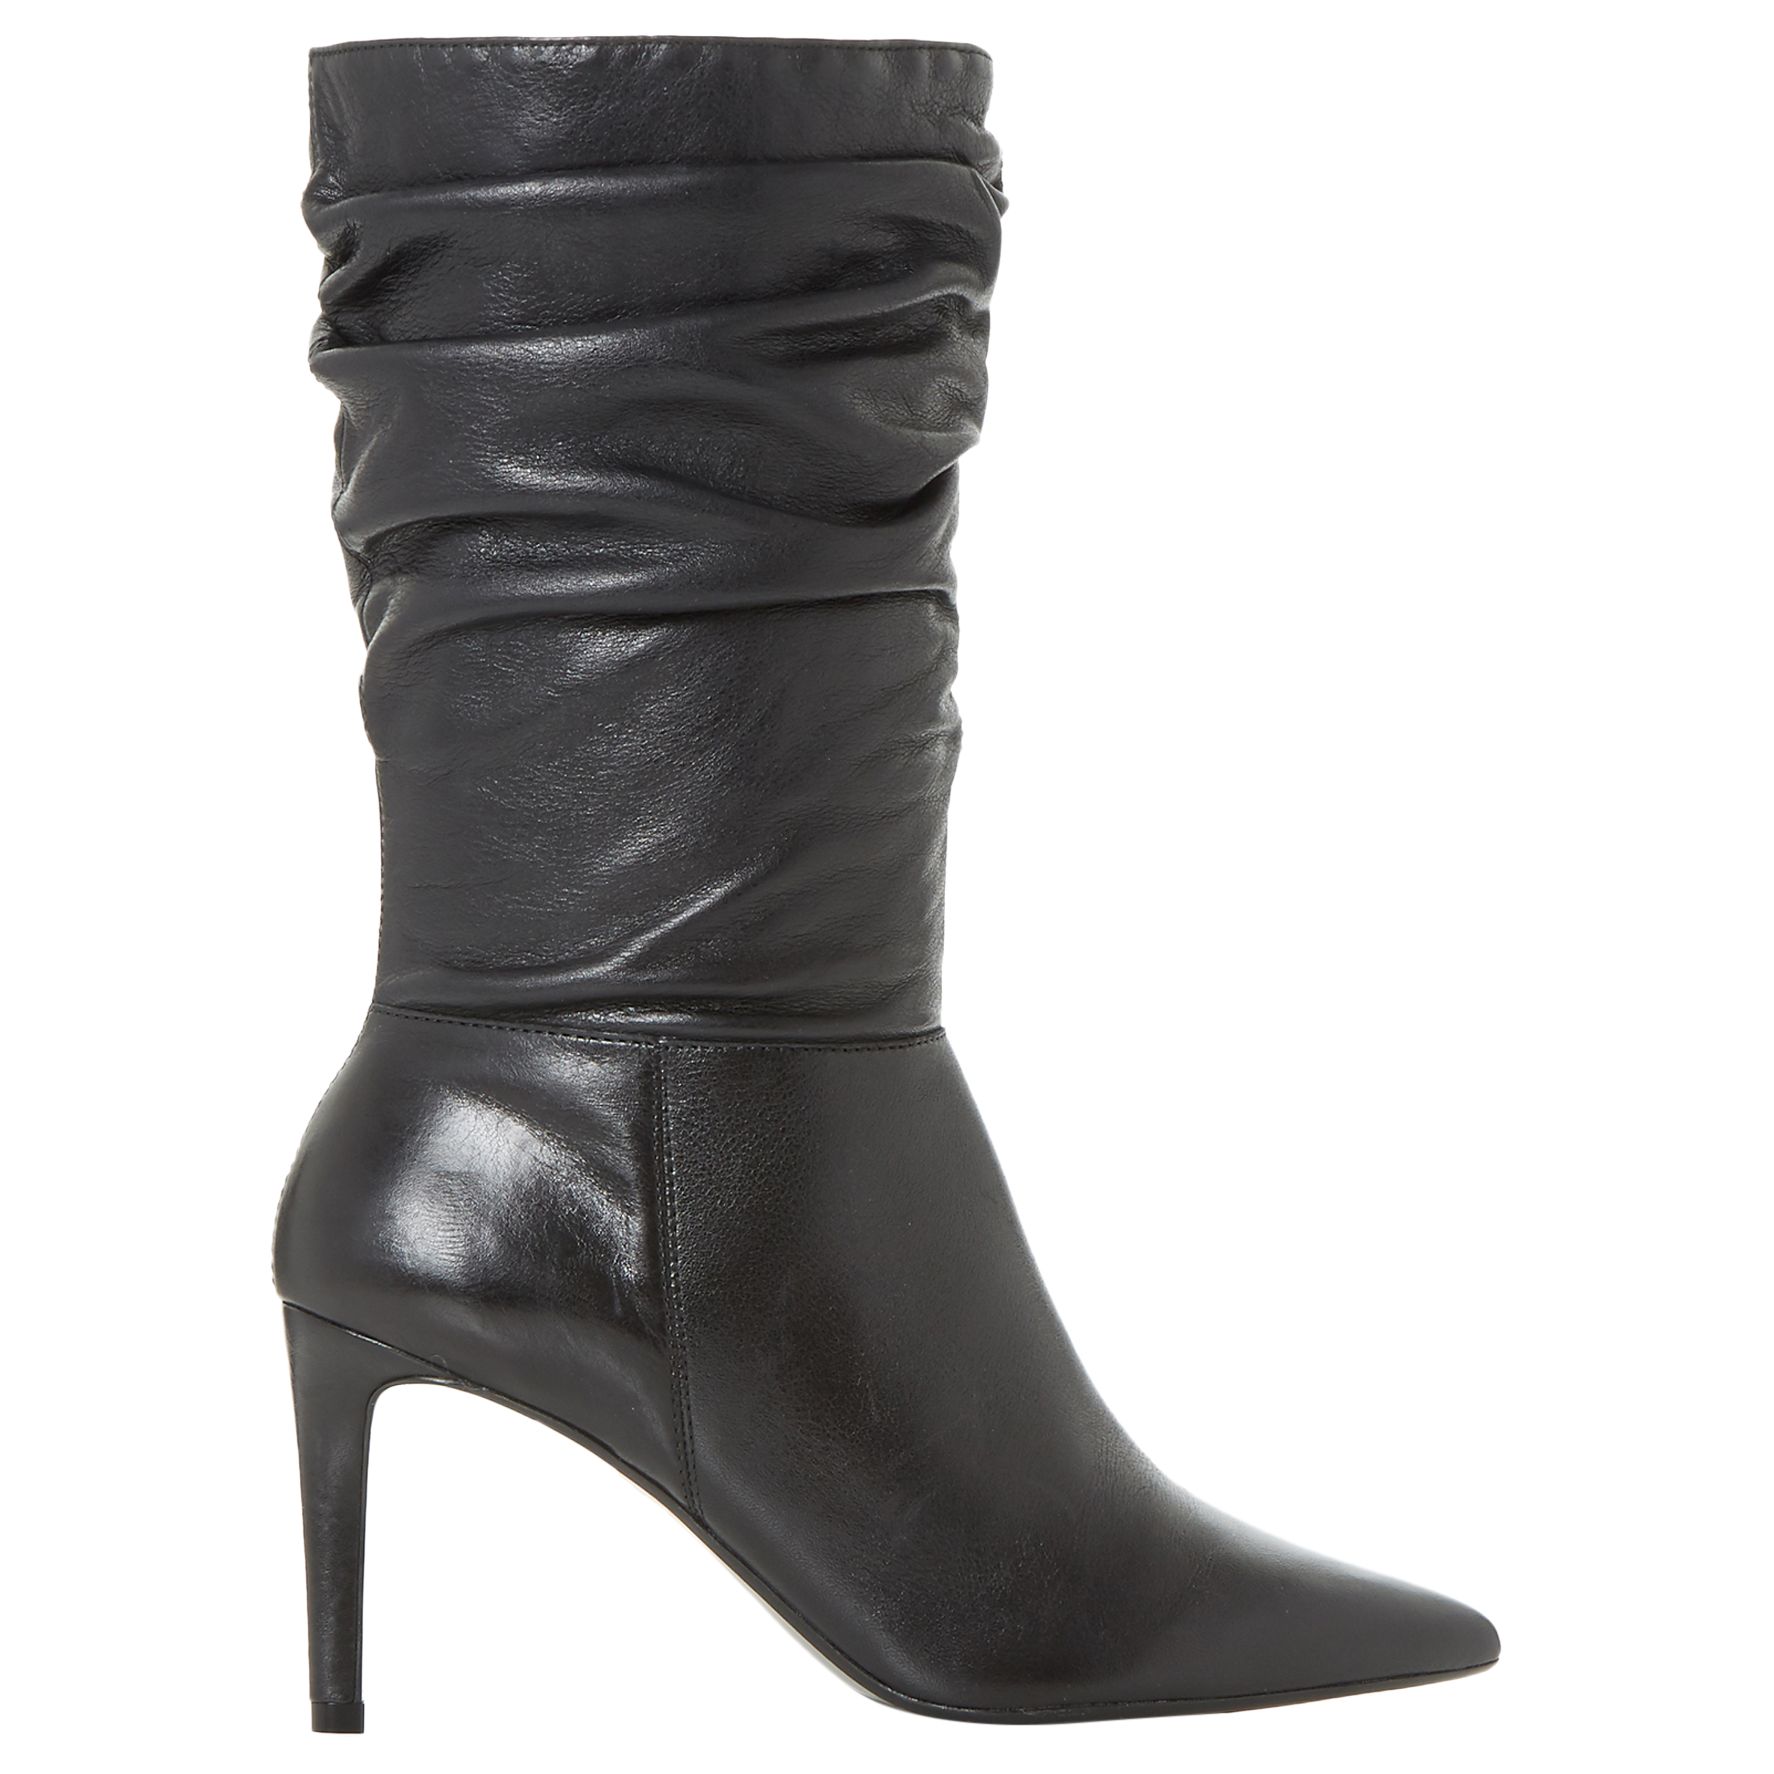 Dune Reenie Pointed Toe Ruched Calf Boots, Black Leather